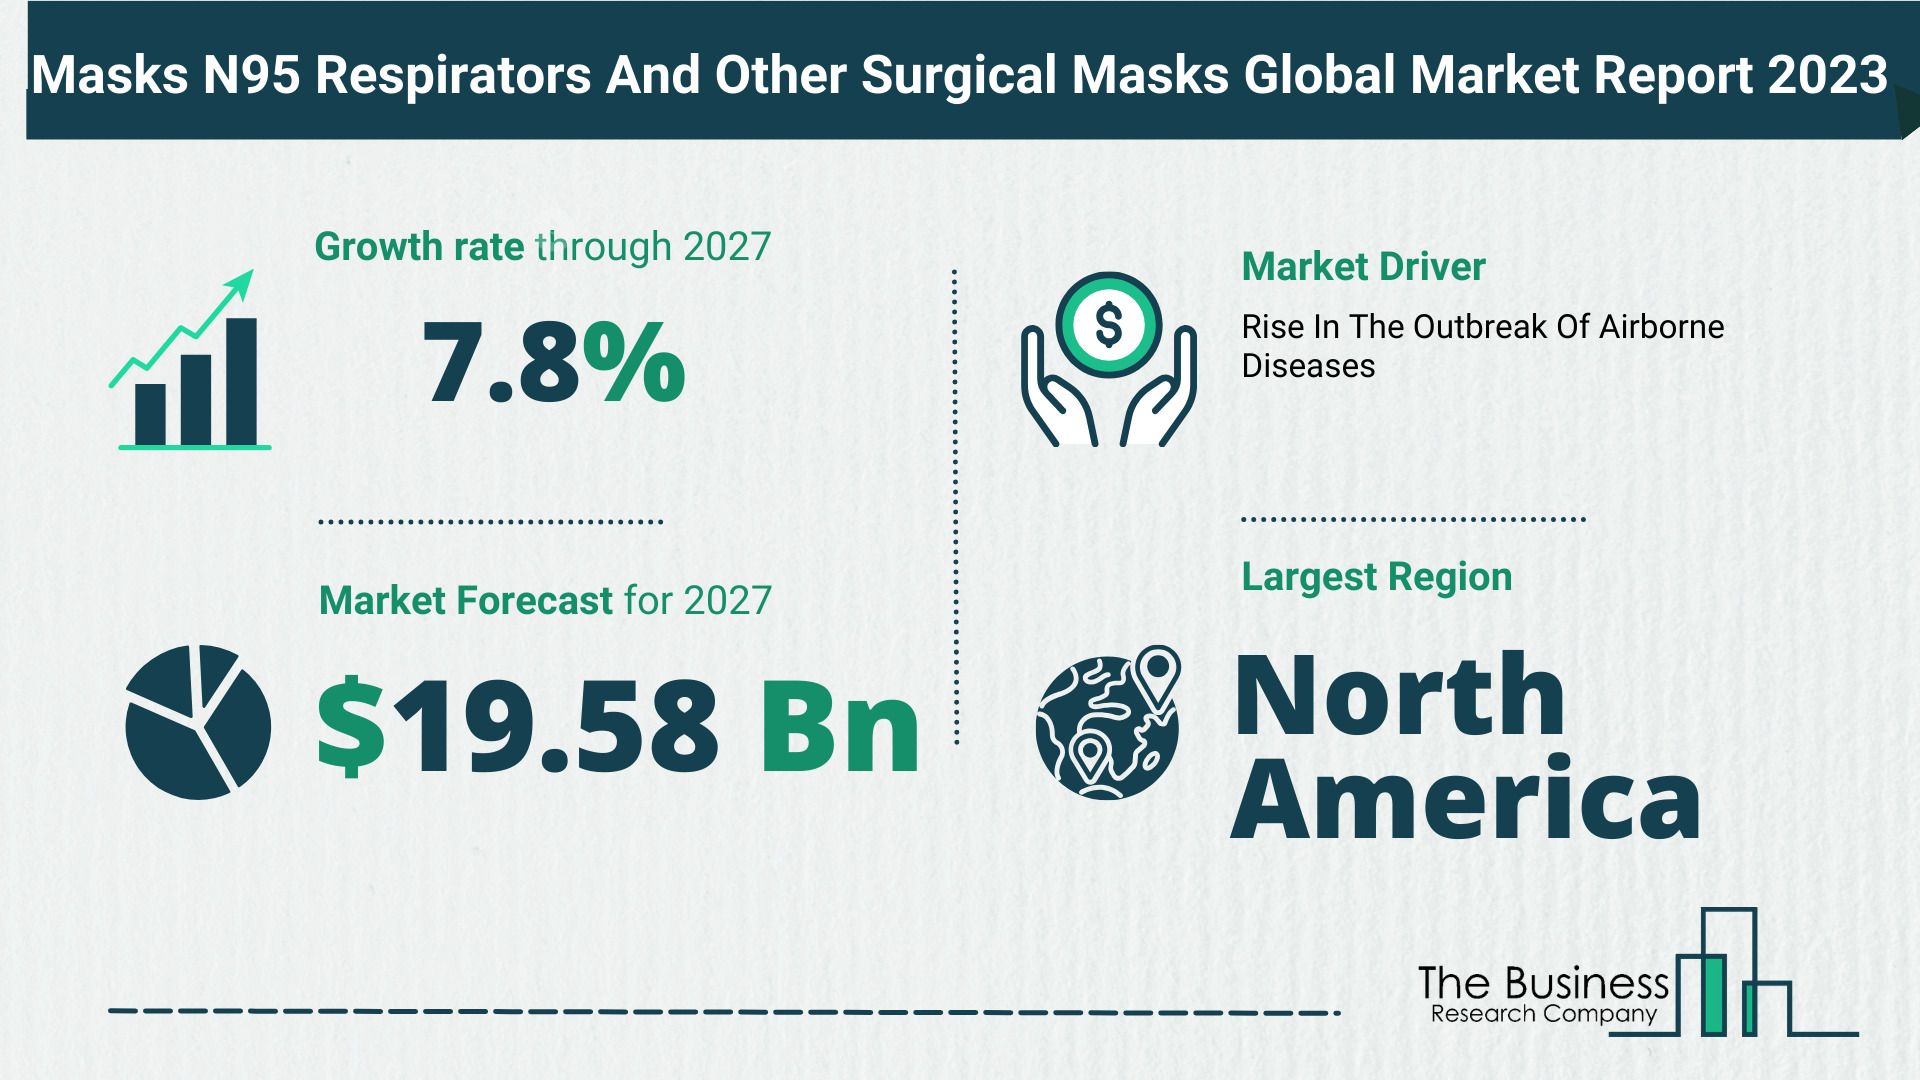 Global Masks N95 Respirators And Other Surgical Masks Market Analysis: Estimated Market Size And Growth Rate